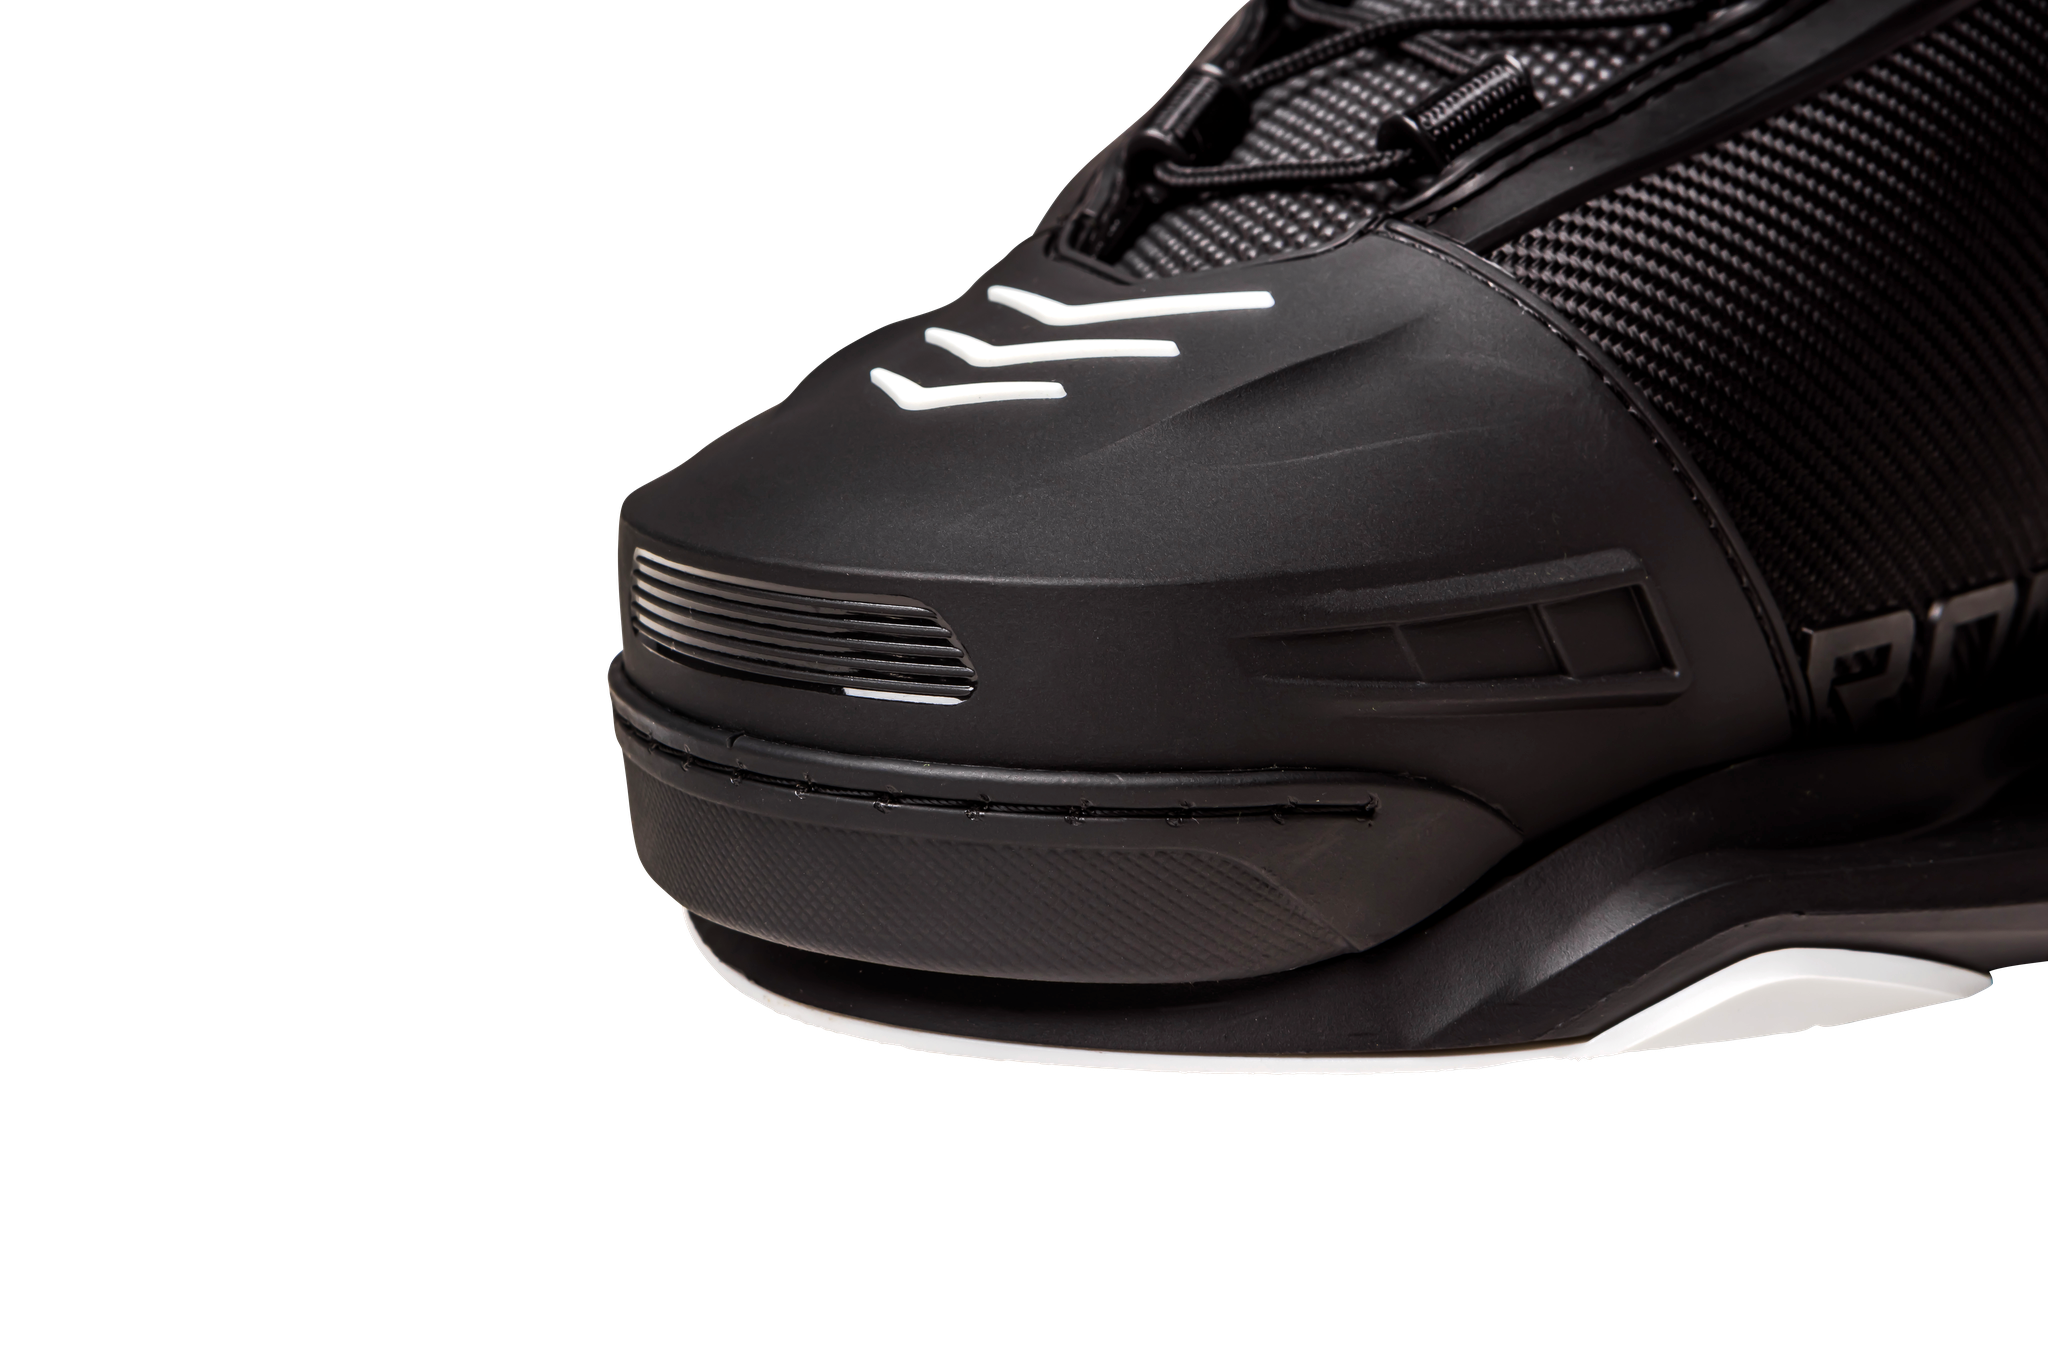 A close up of a black and white Ronix skate shoe featuring Cordura ballistic nylon upper.